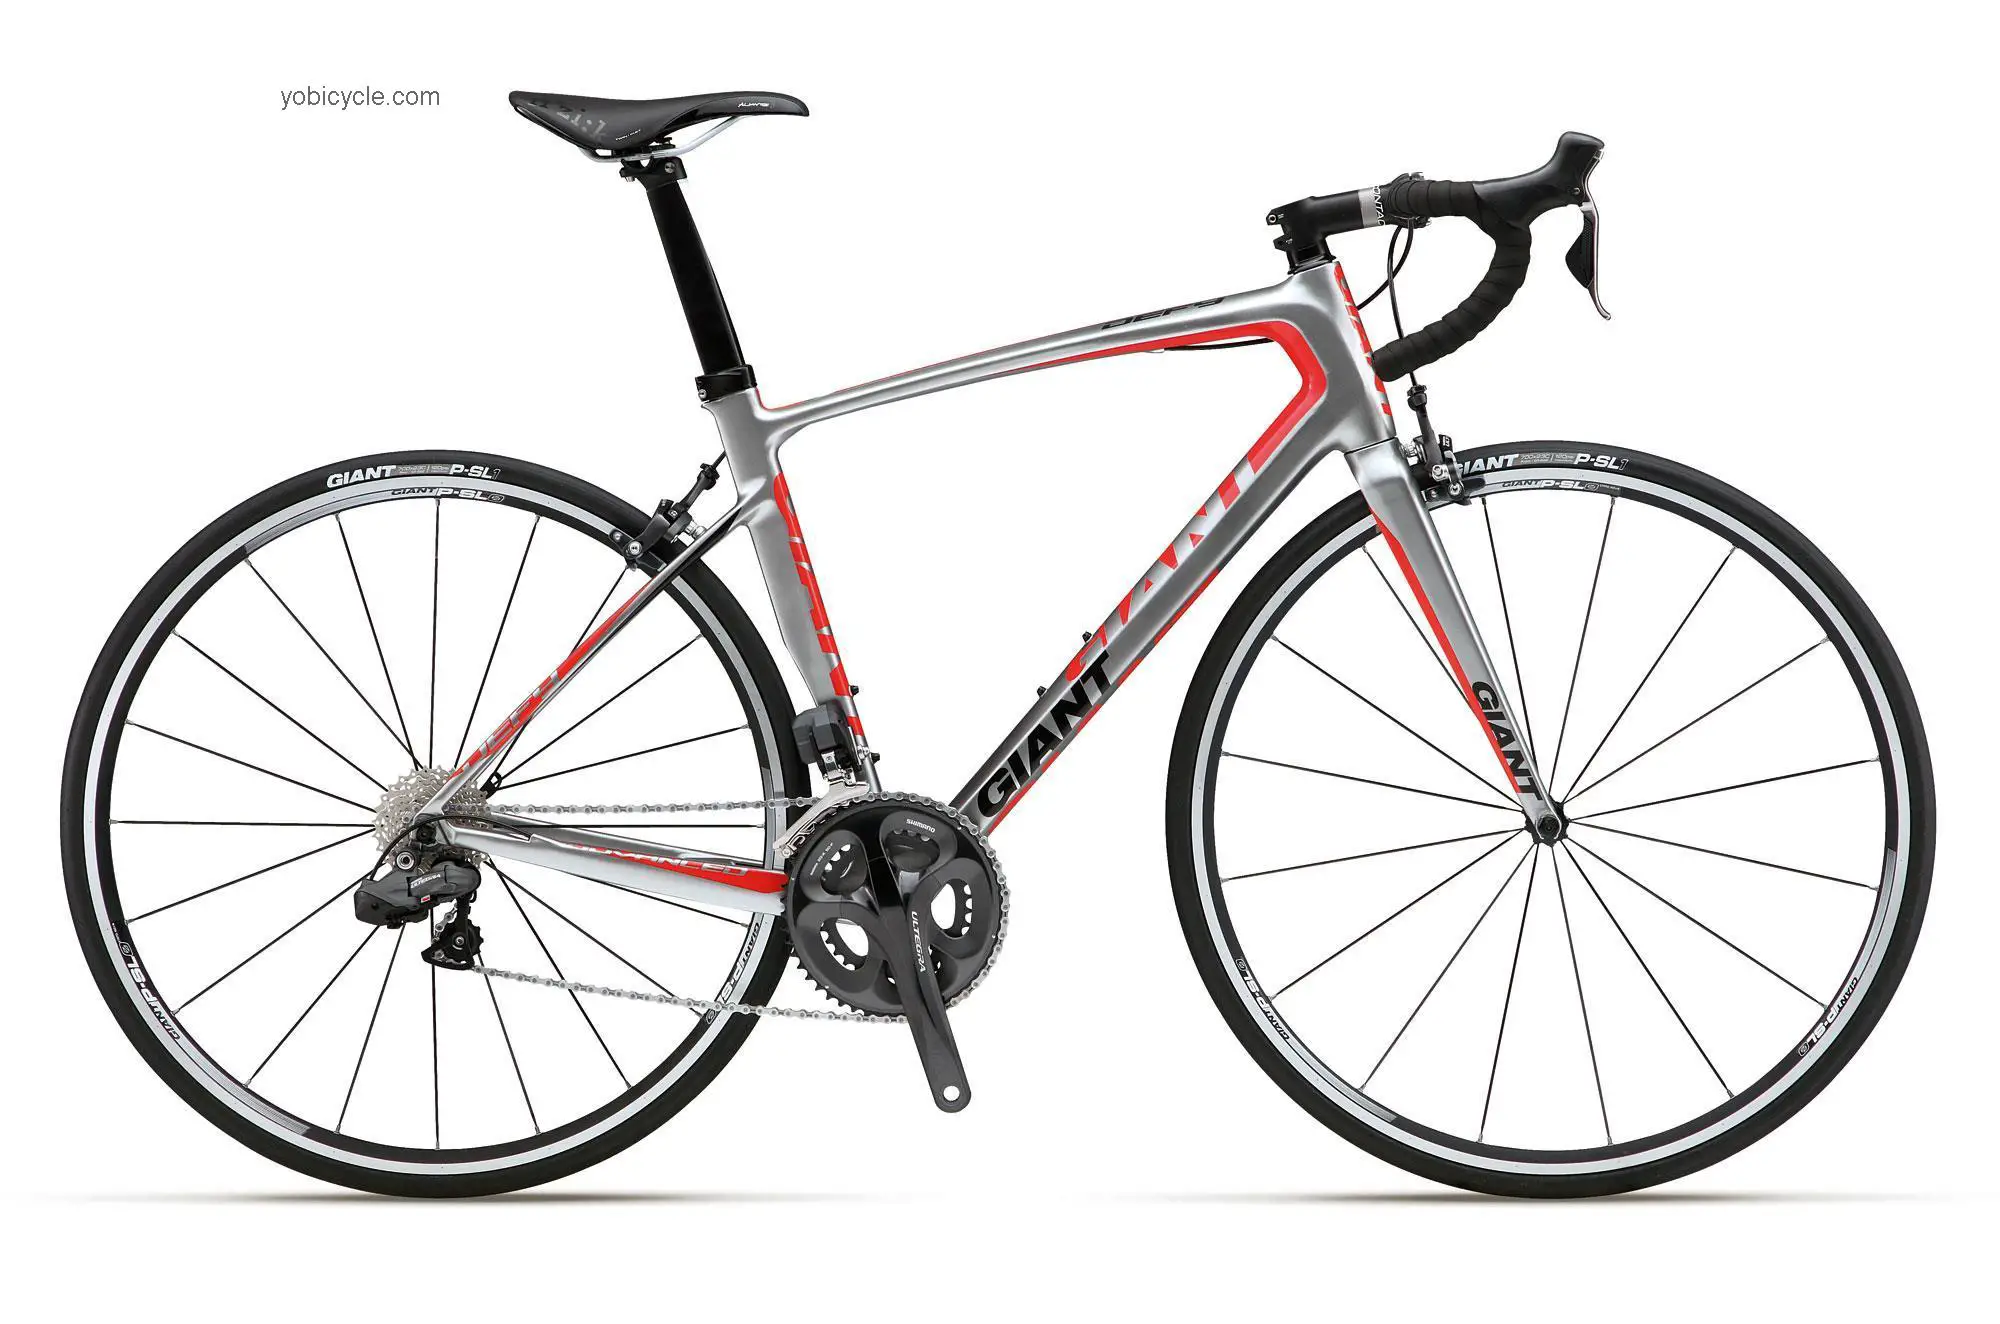 Giant Defy Advanced 0 2012 comparison online with competitors